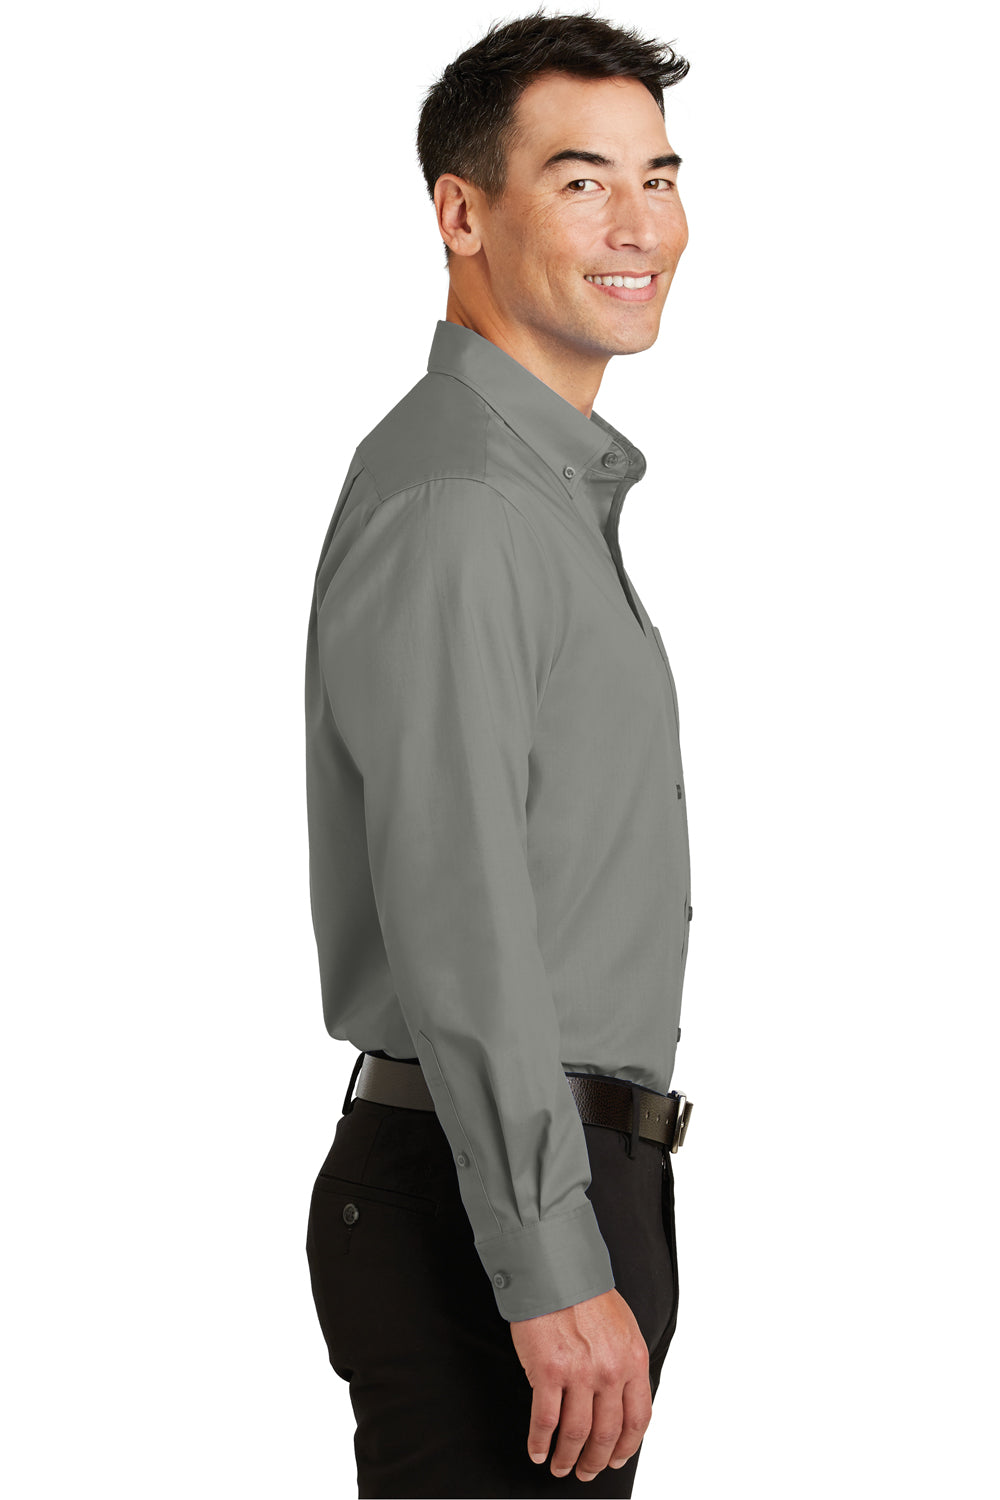 Port Authority S663 Mens SuperPro Wrinkle Resistant Long Sleeve Button Down Shirt w/ Pocket Monument Grey Side